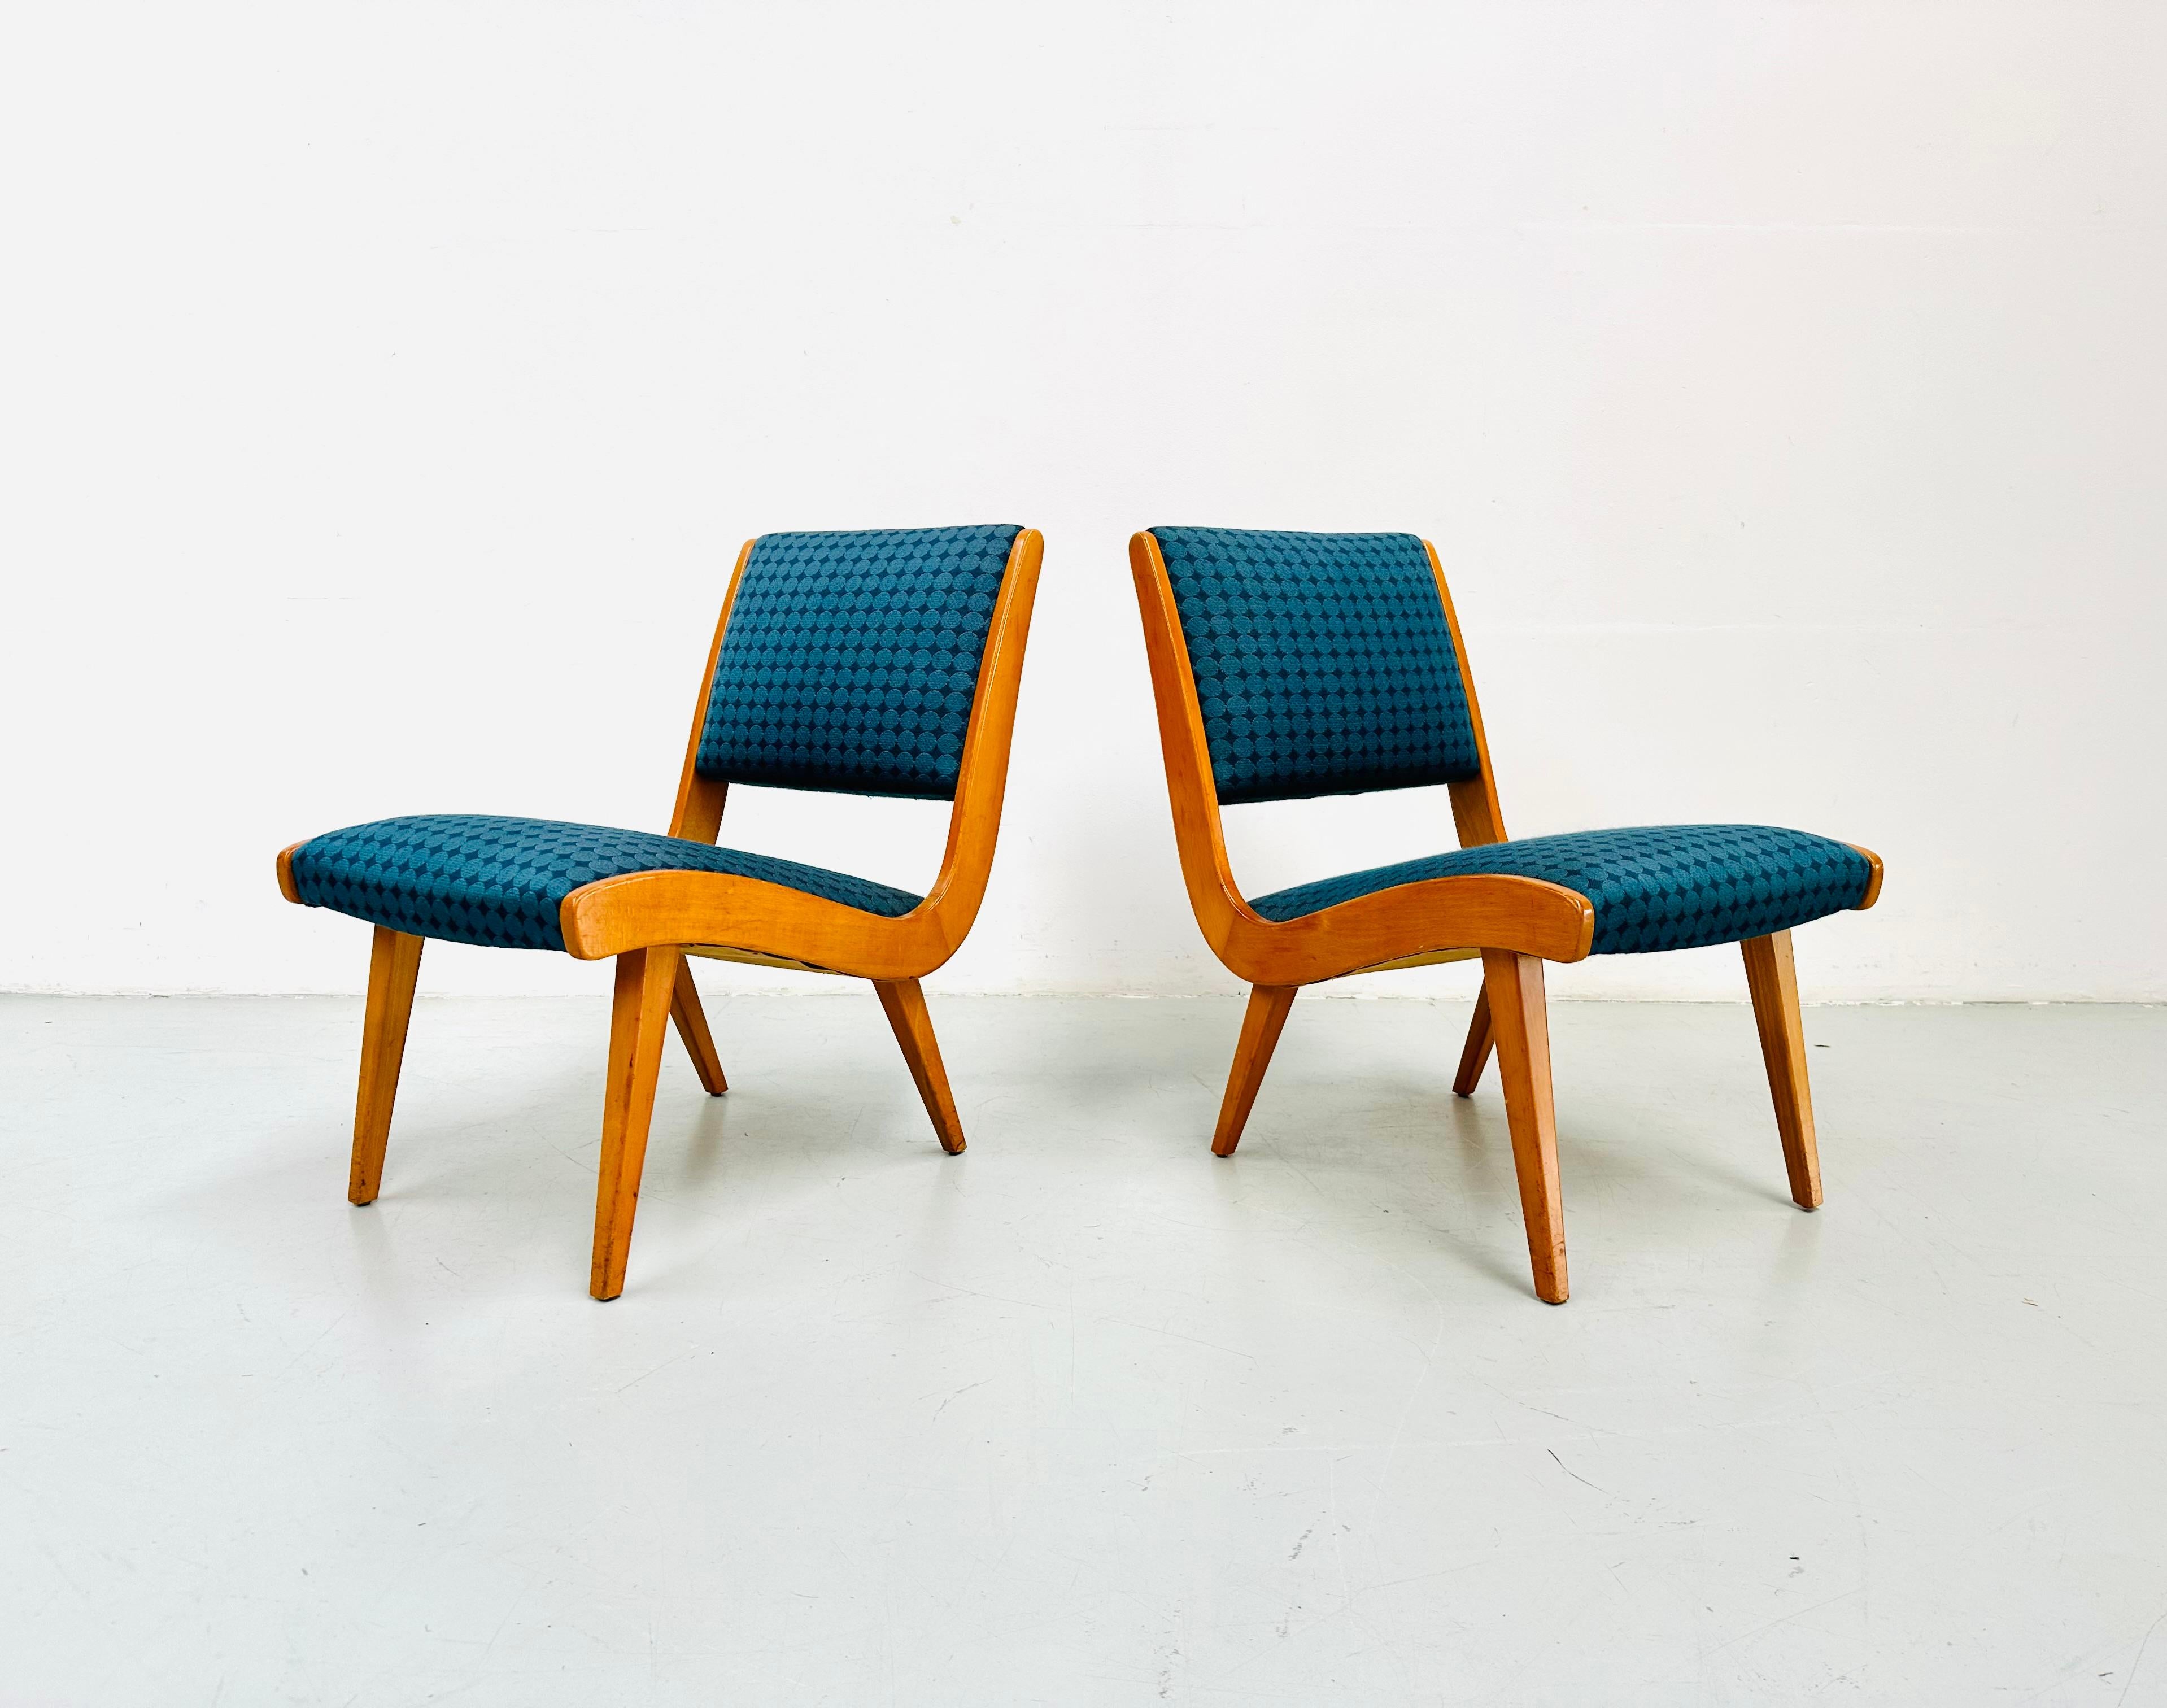 1950s Rare Set Vostra Chairs Numbered & Original Fabric by Jens Risom for Knoll. In Good Condition For Sale In Eindhoven, Noord Brabant